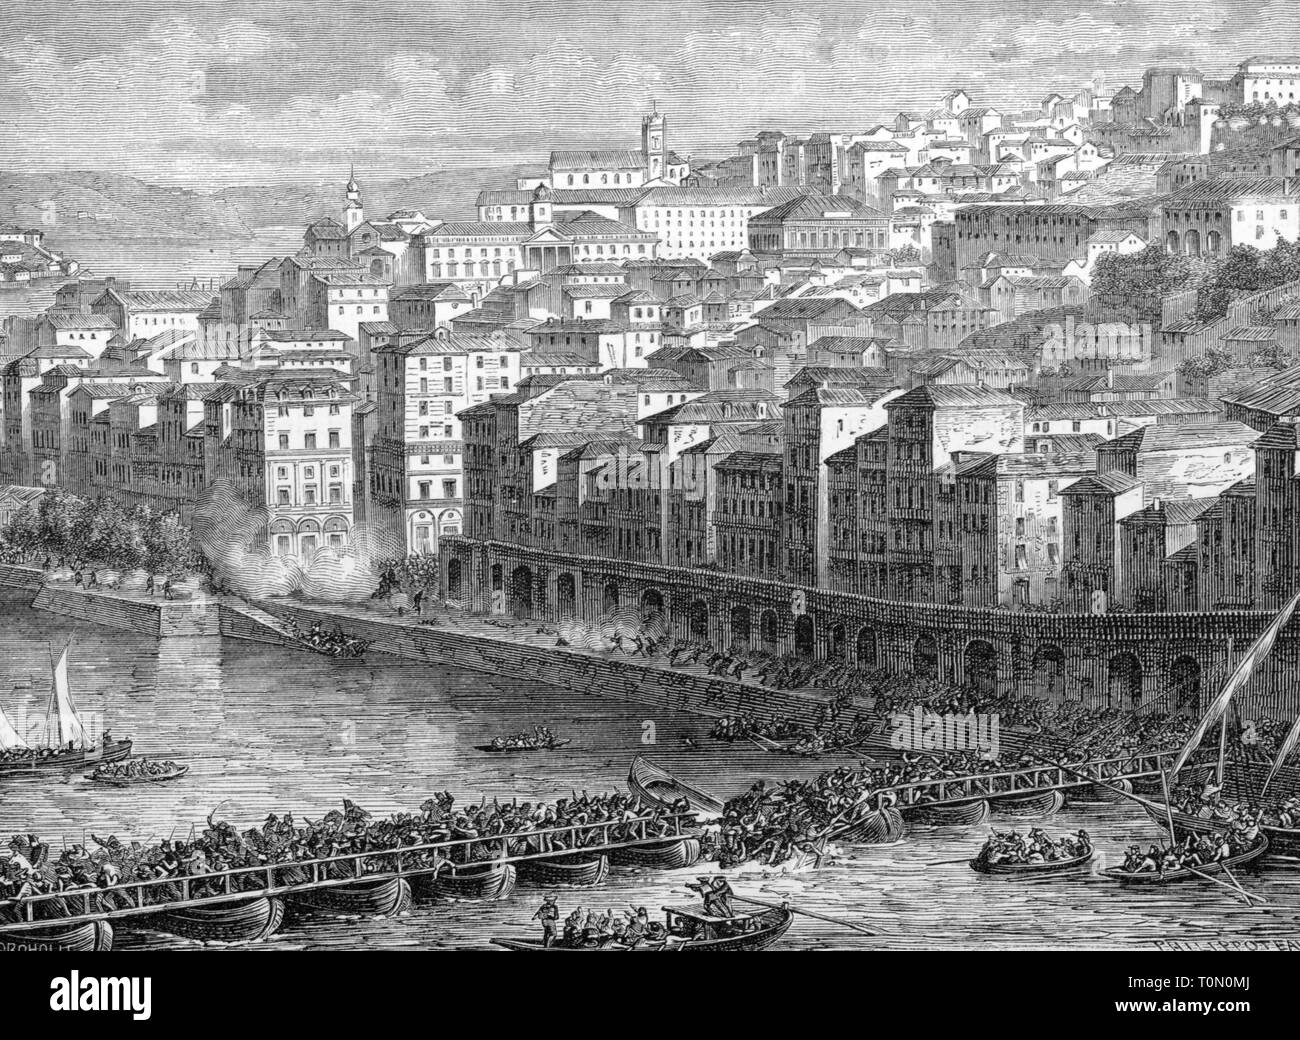 Peninsula War 1807 - 1814, conquest of Oporto by French troops, the Ponte das Barcas cracks under the weight of the fleeing civilian population, 29.3.1809, wood engraving, 2nd half 19th century, flight, crowd, crowds, crowds of people, crowd of people, mass exodus, stampede, catastrophe, catastrophes, disaster, disasters, mishap, crash, crashes, collapses, collapse, collapsing, breaking down, break down, pontoon bridge, pontoon bridges, bridge of boats, bridge, bridges, river, rivers, Douro, Portugal, Porto, city, civilian, civilians, populace, N, Additional-Rights-Clearance-Info-Not-Available Stock Photo